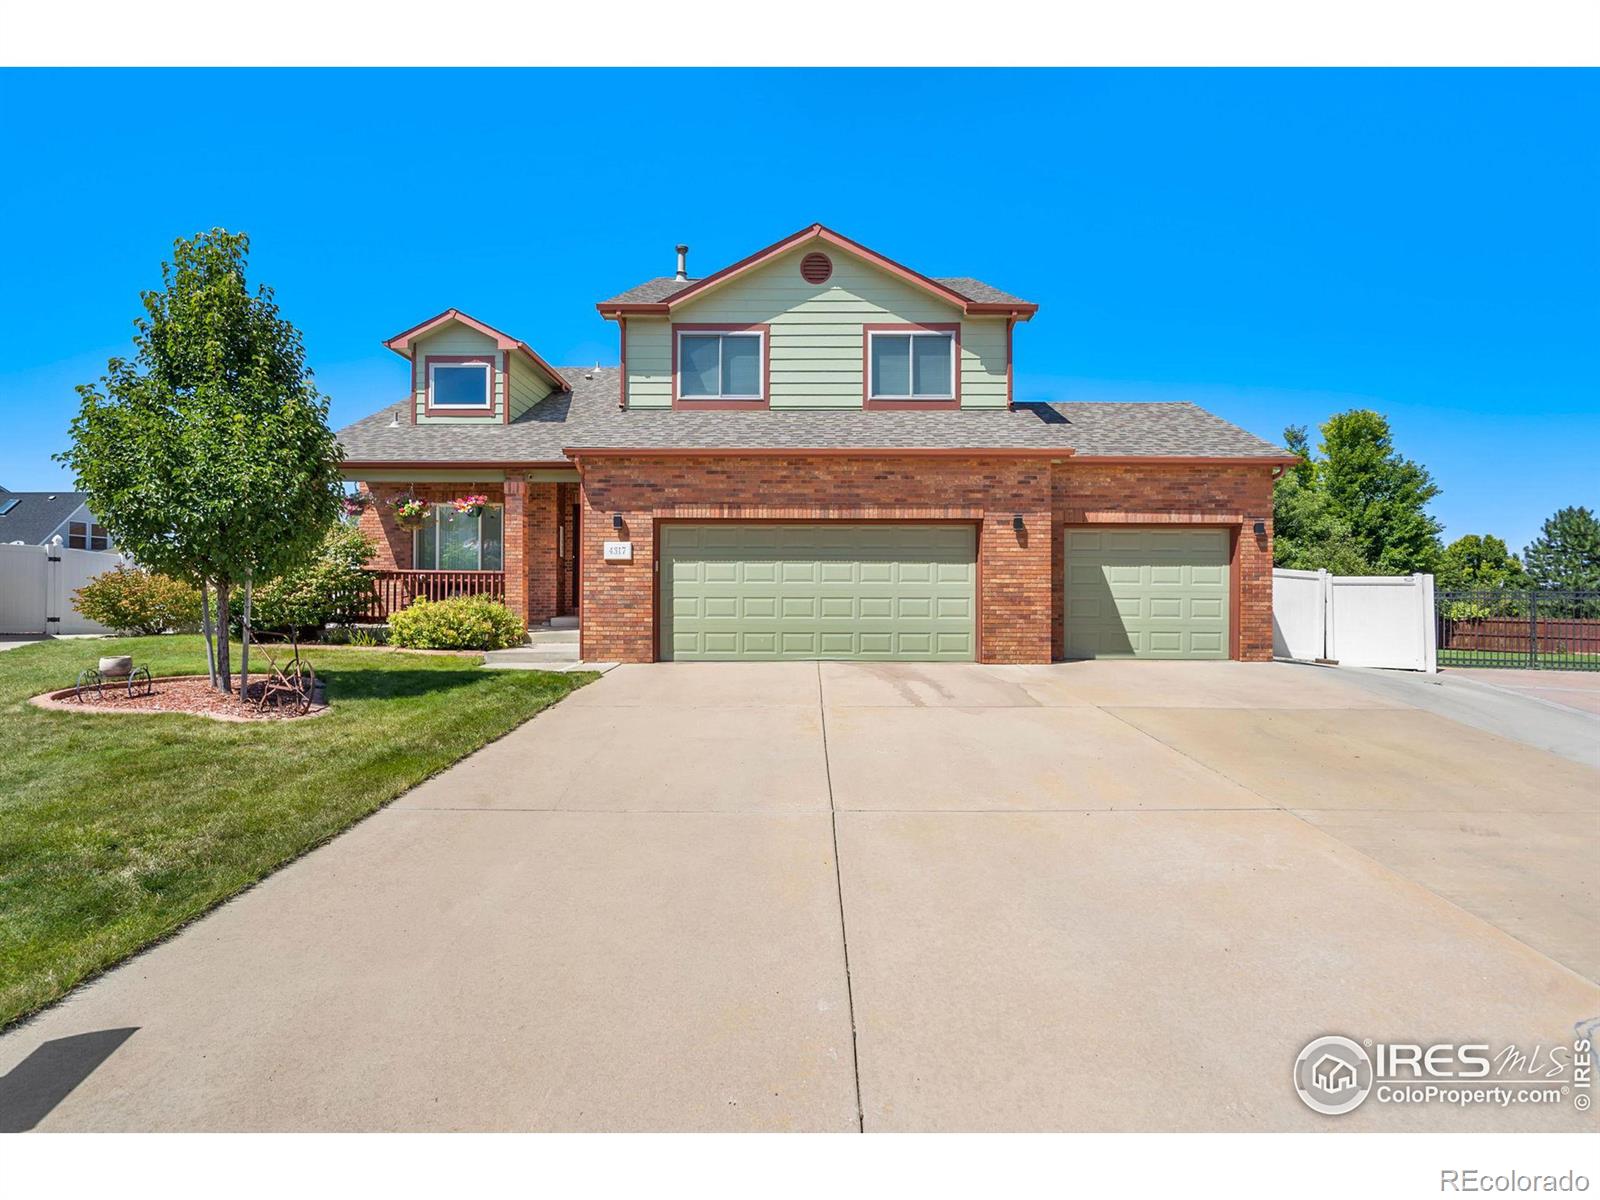 4317  29th St Rd, greeley MLS: 456789994342 Beds: 5 Baths: 4 Price: $587,000